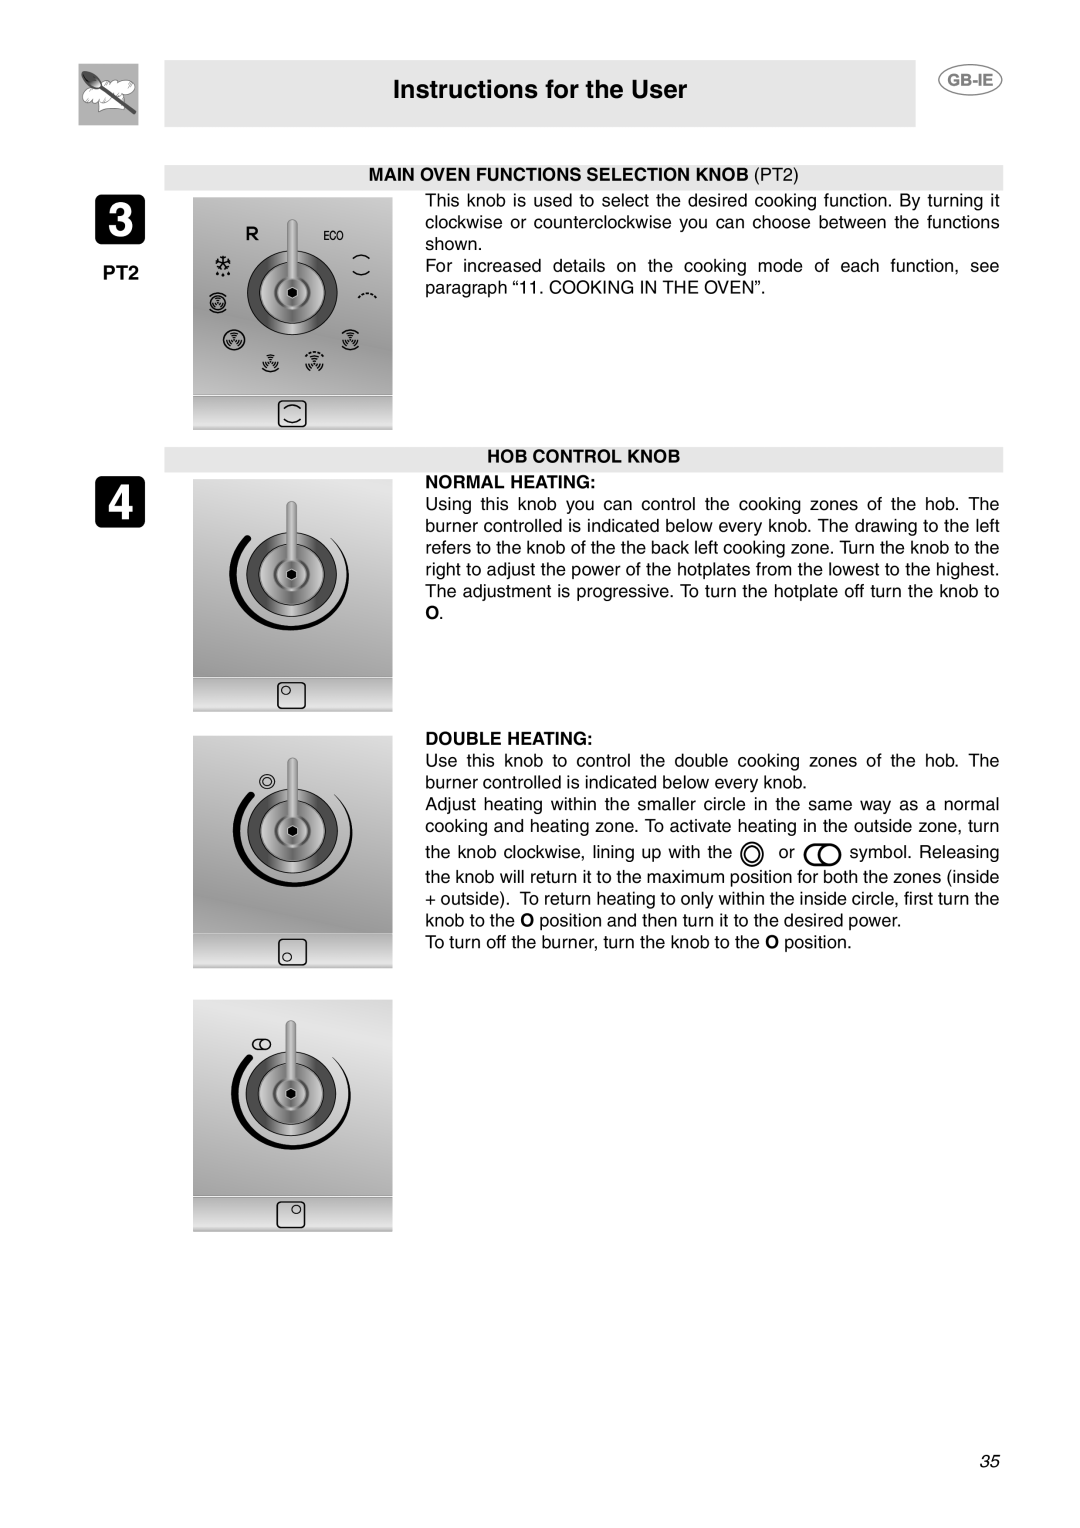 Smeg CE6CMX manual Instructions for the User, MAIN OVEN FUNCTIONS SELECTION KNOB PT2, Hob Control Knob Normal Heating 